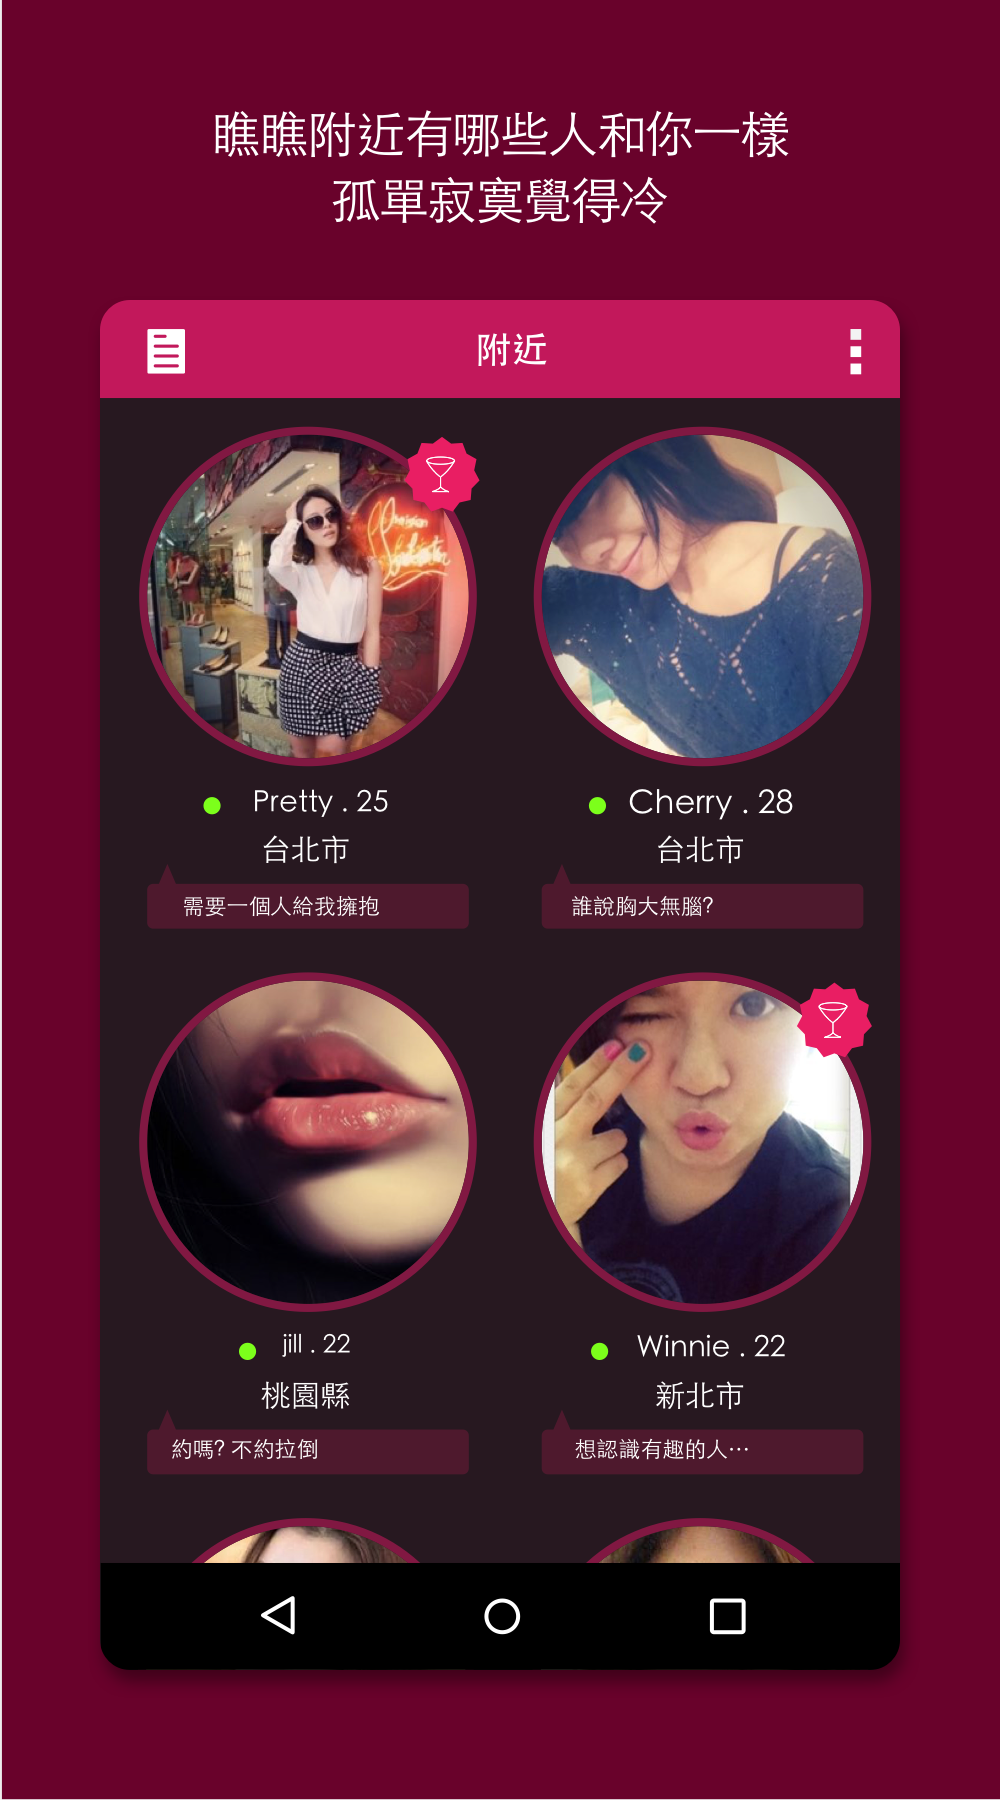 Android application EasyDating- Chat, Meet, Date screenshort